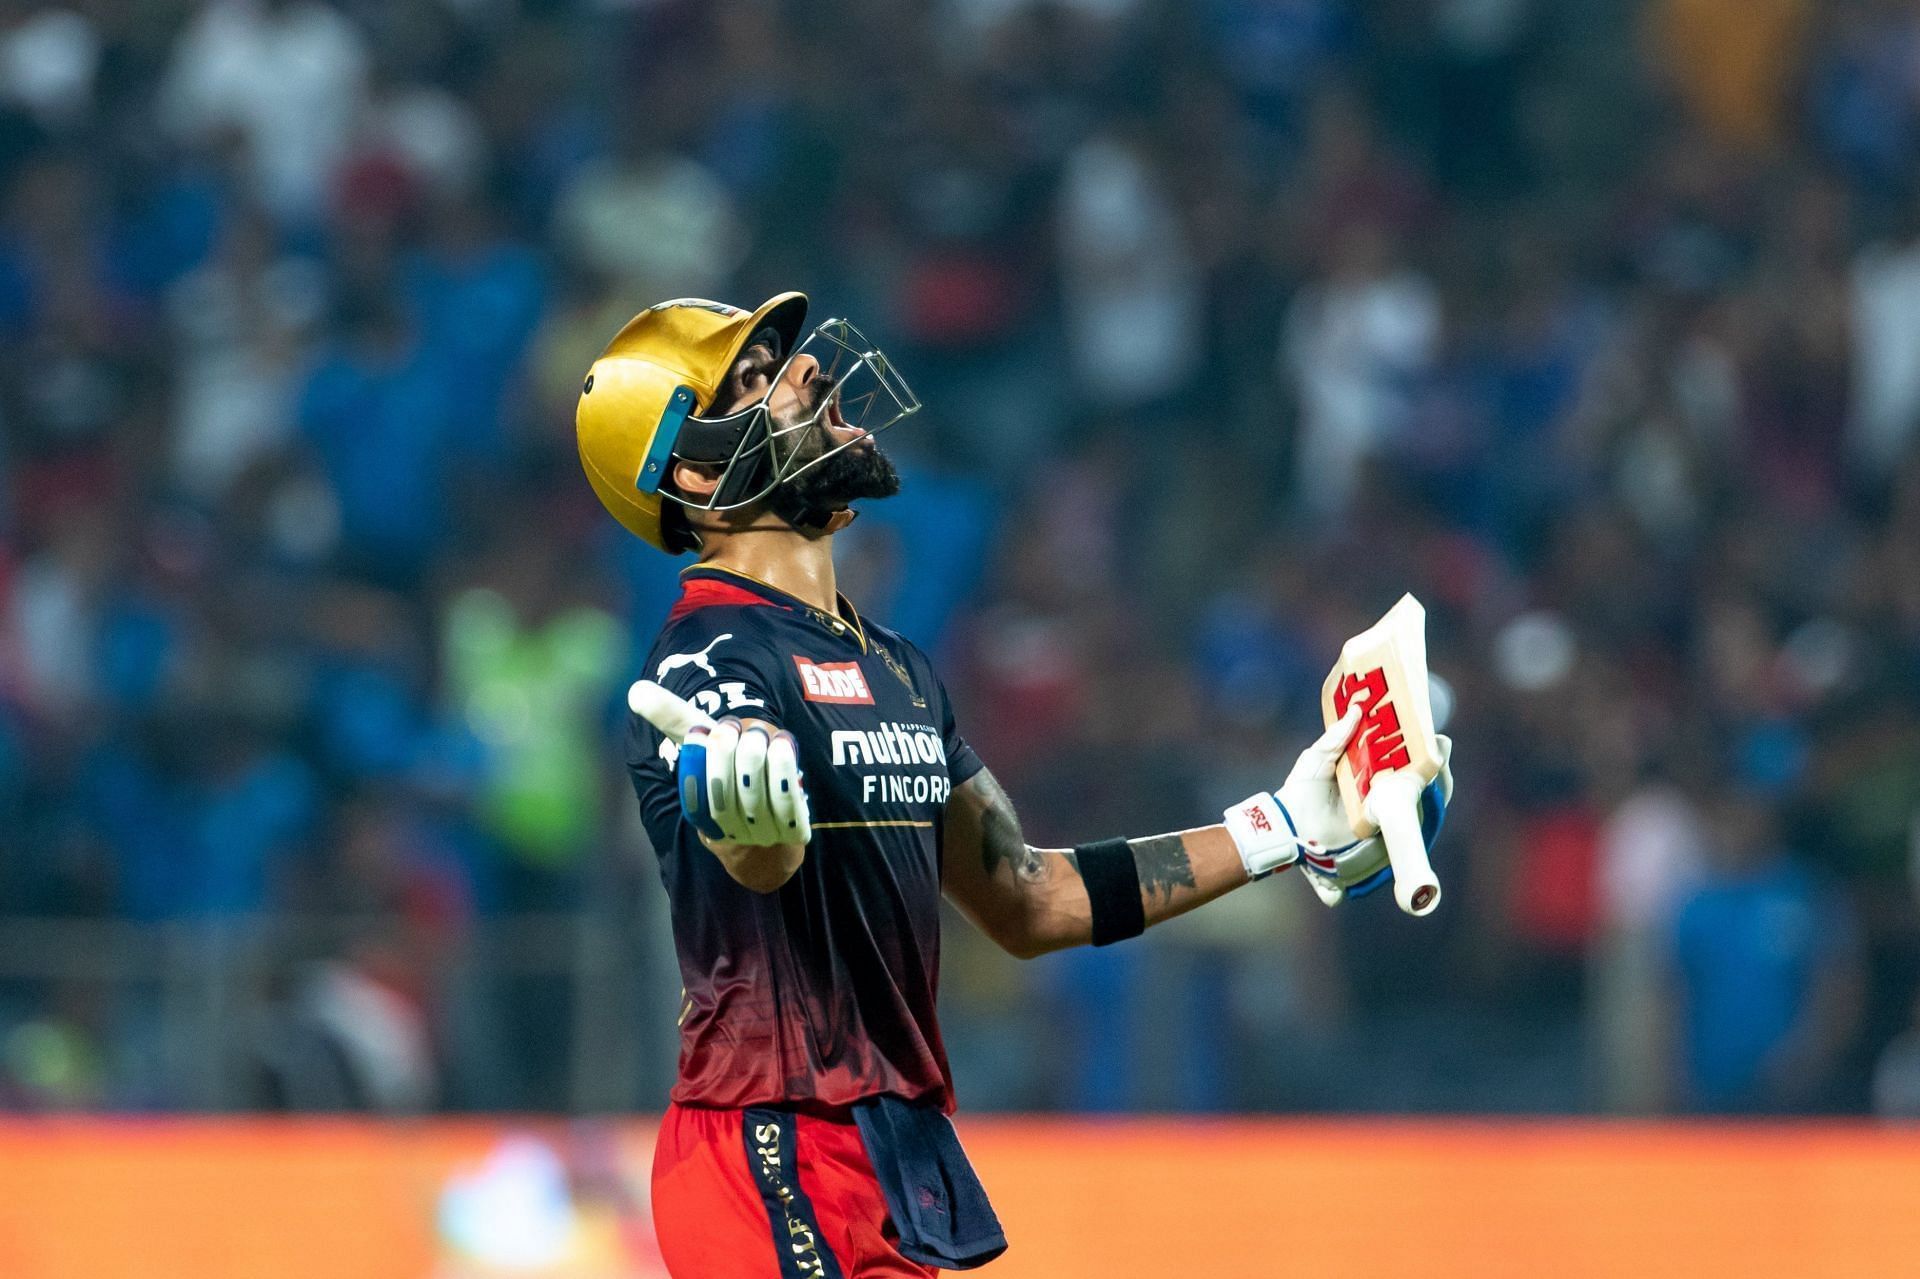 For someone of the caliber of Virat Kohli, IPL 2022 has been a humbling experience